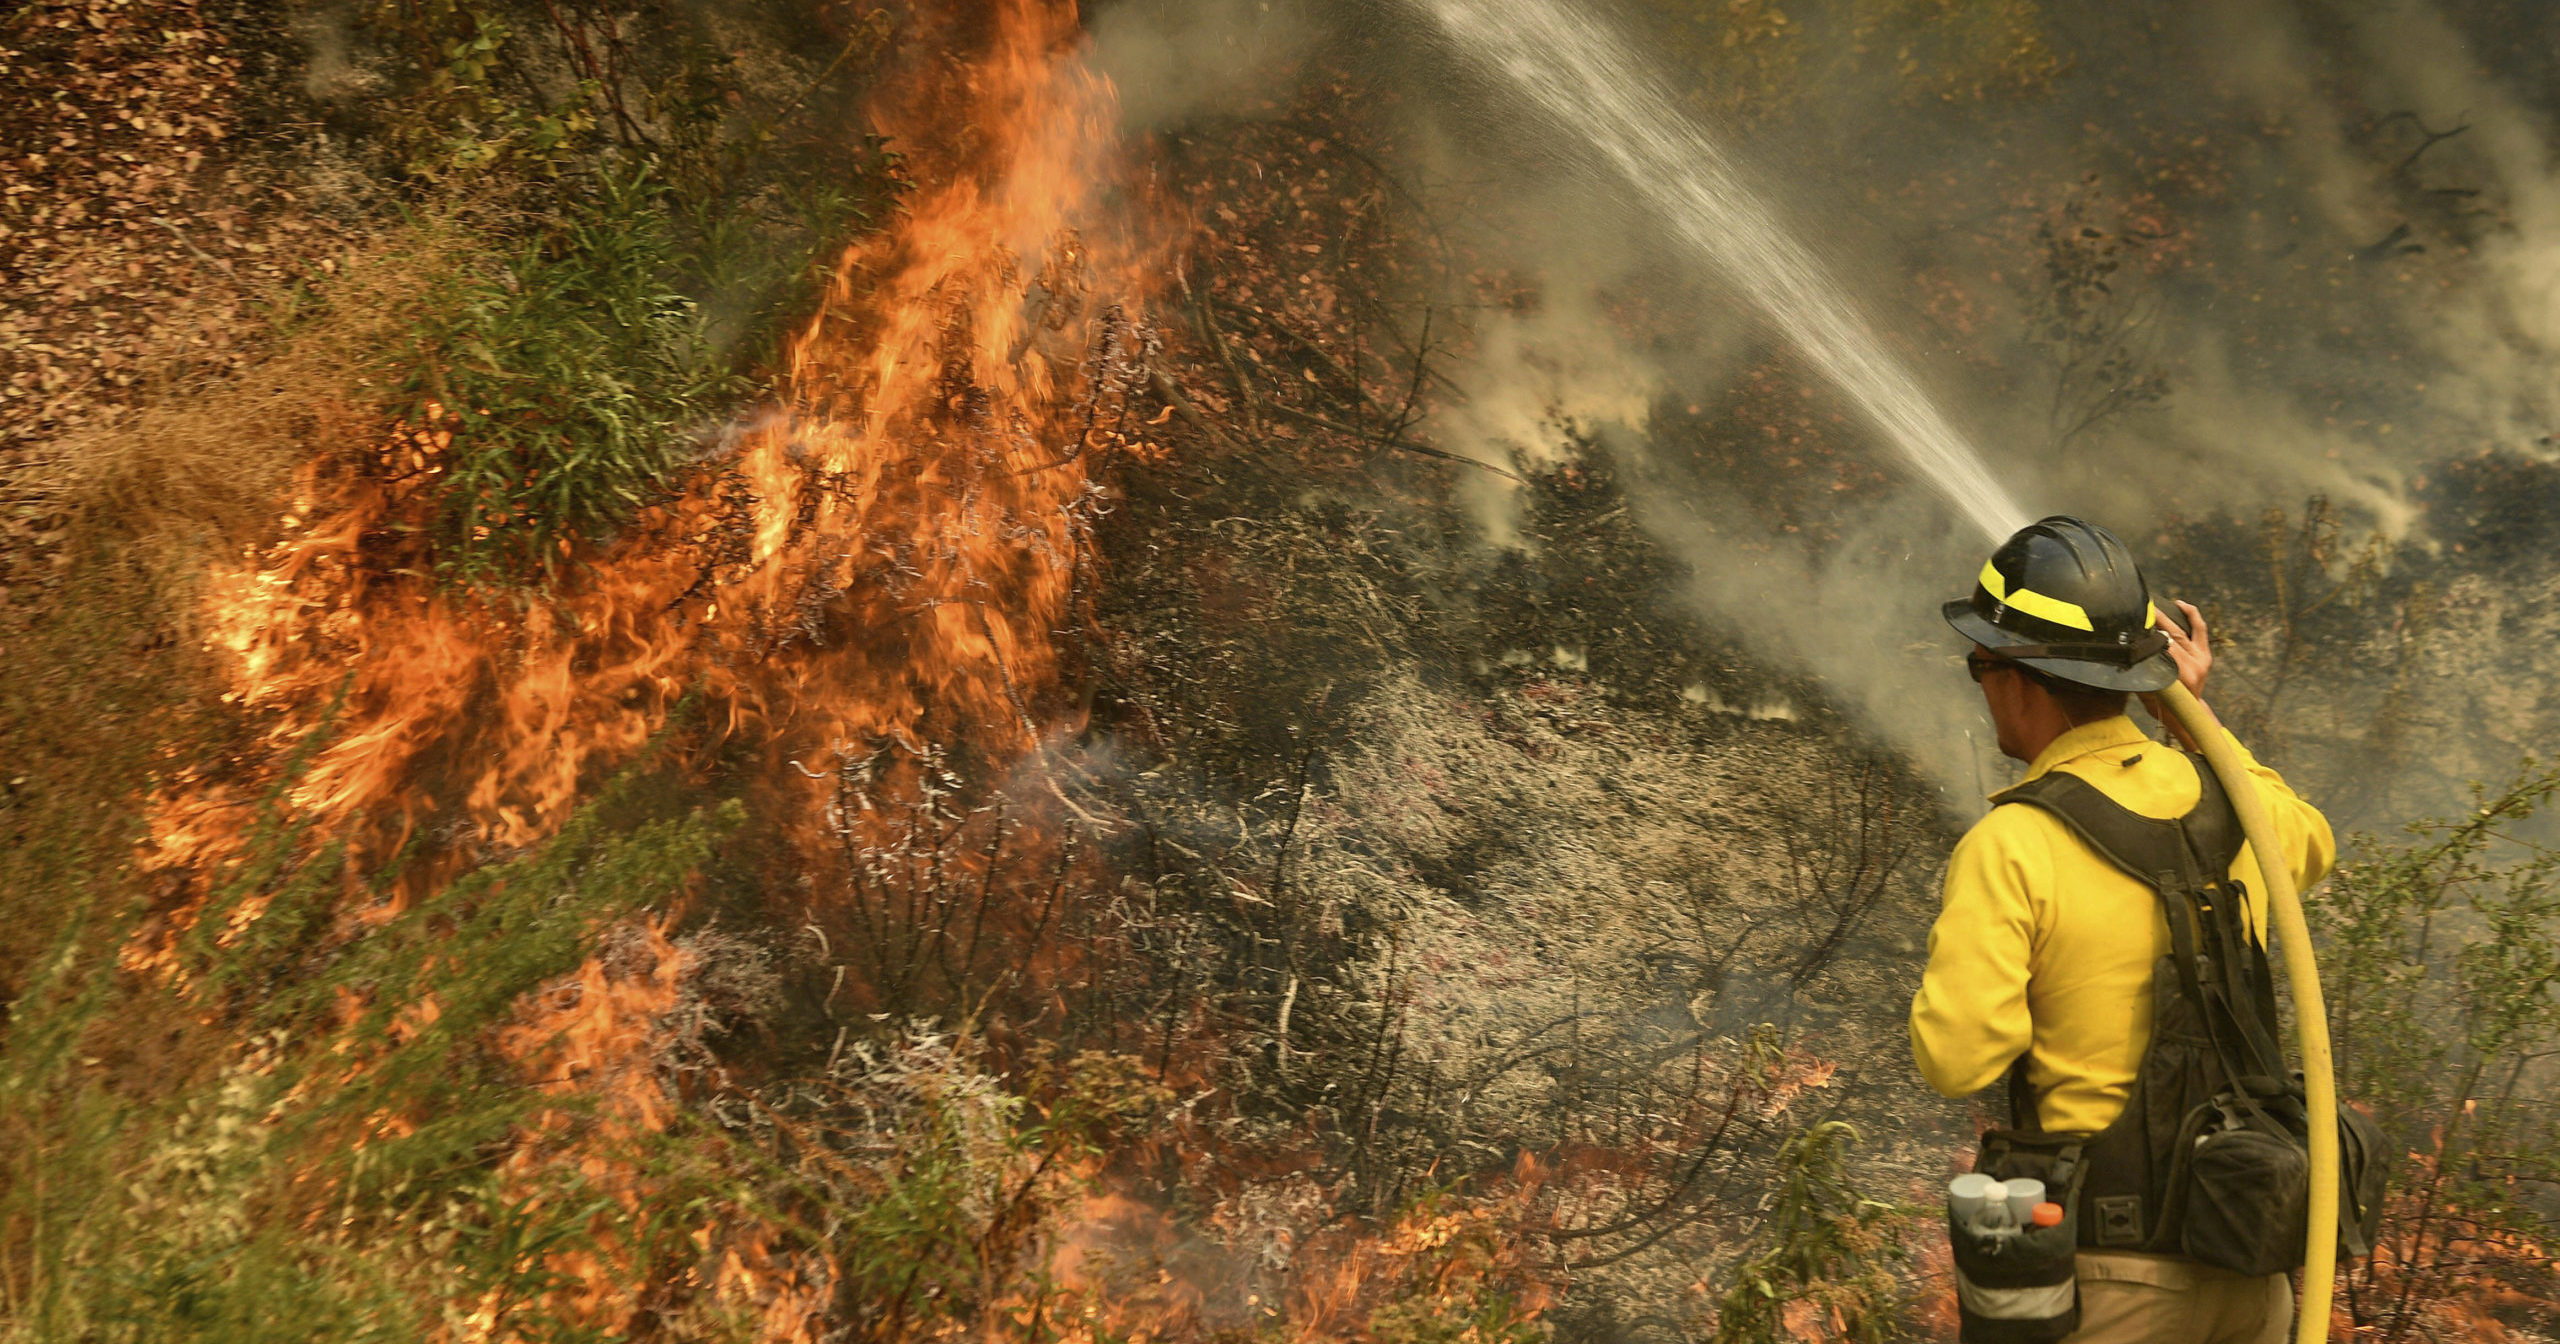 A firefighter puts out a fire northwest of Forrest Falls, California, on Sept. 10, 2020.